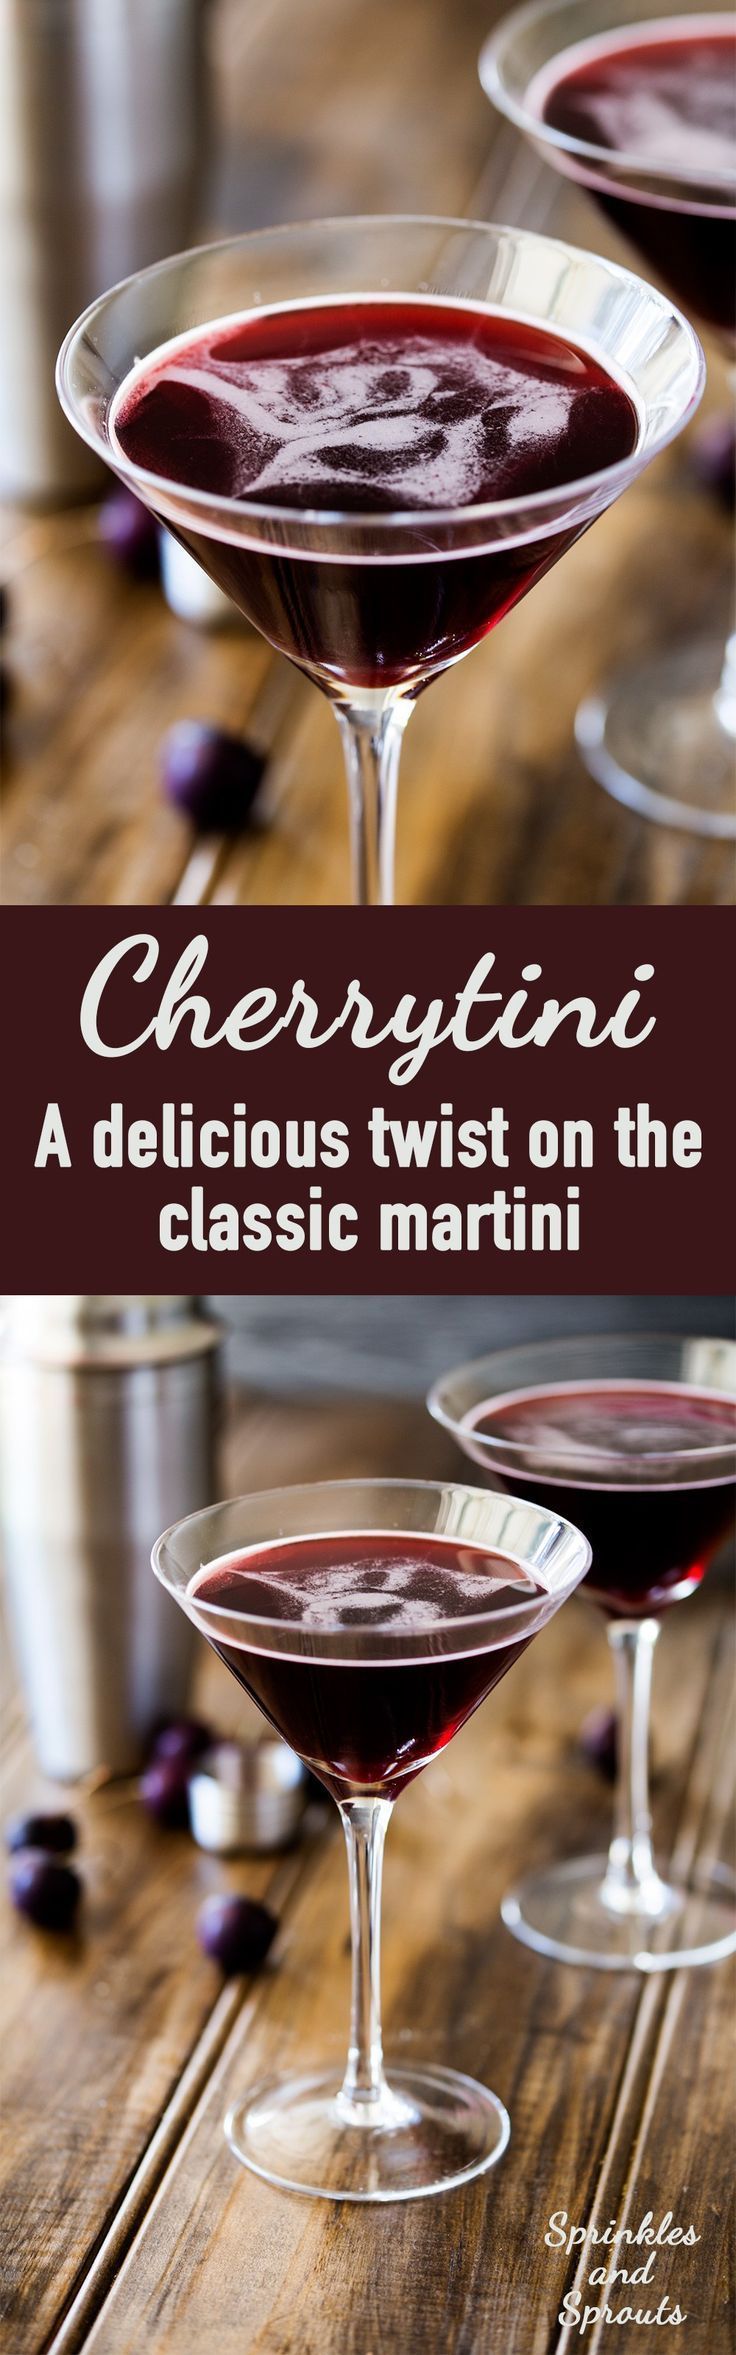 This cherrytini is the perfect fruity martini! It tastes like an adult version of cherry drop sweets. Packed with cherry flavour